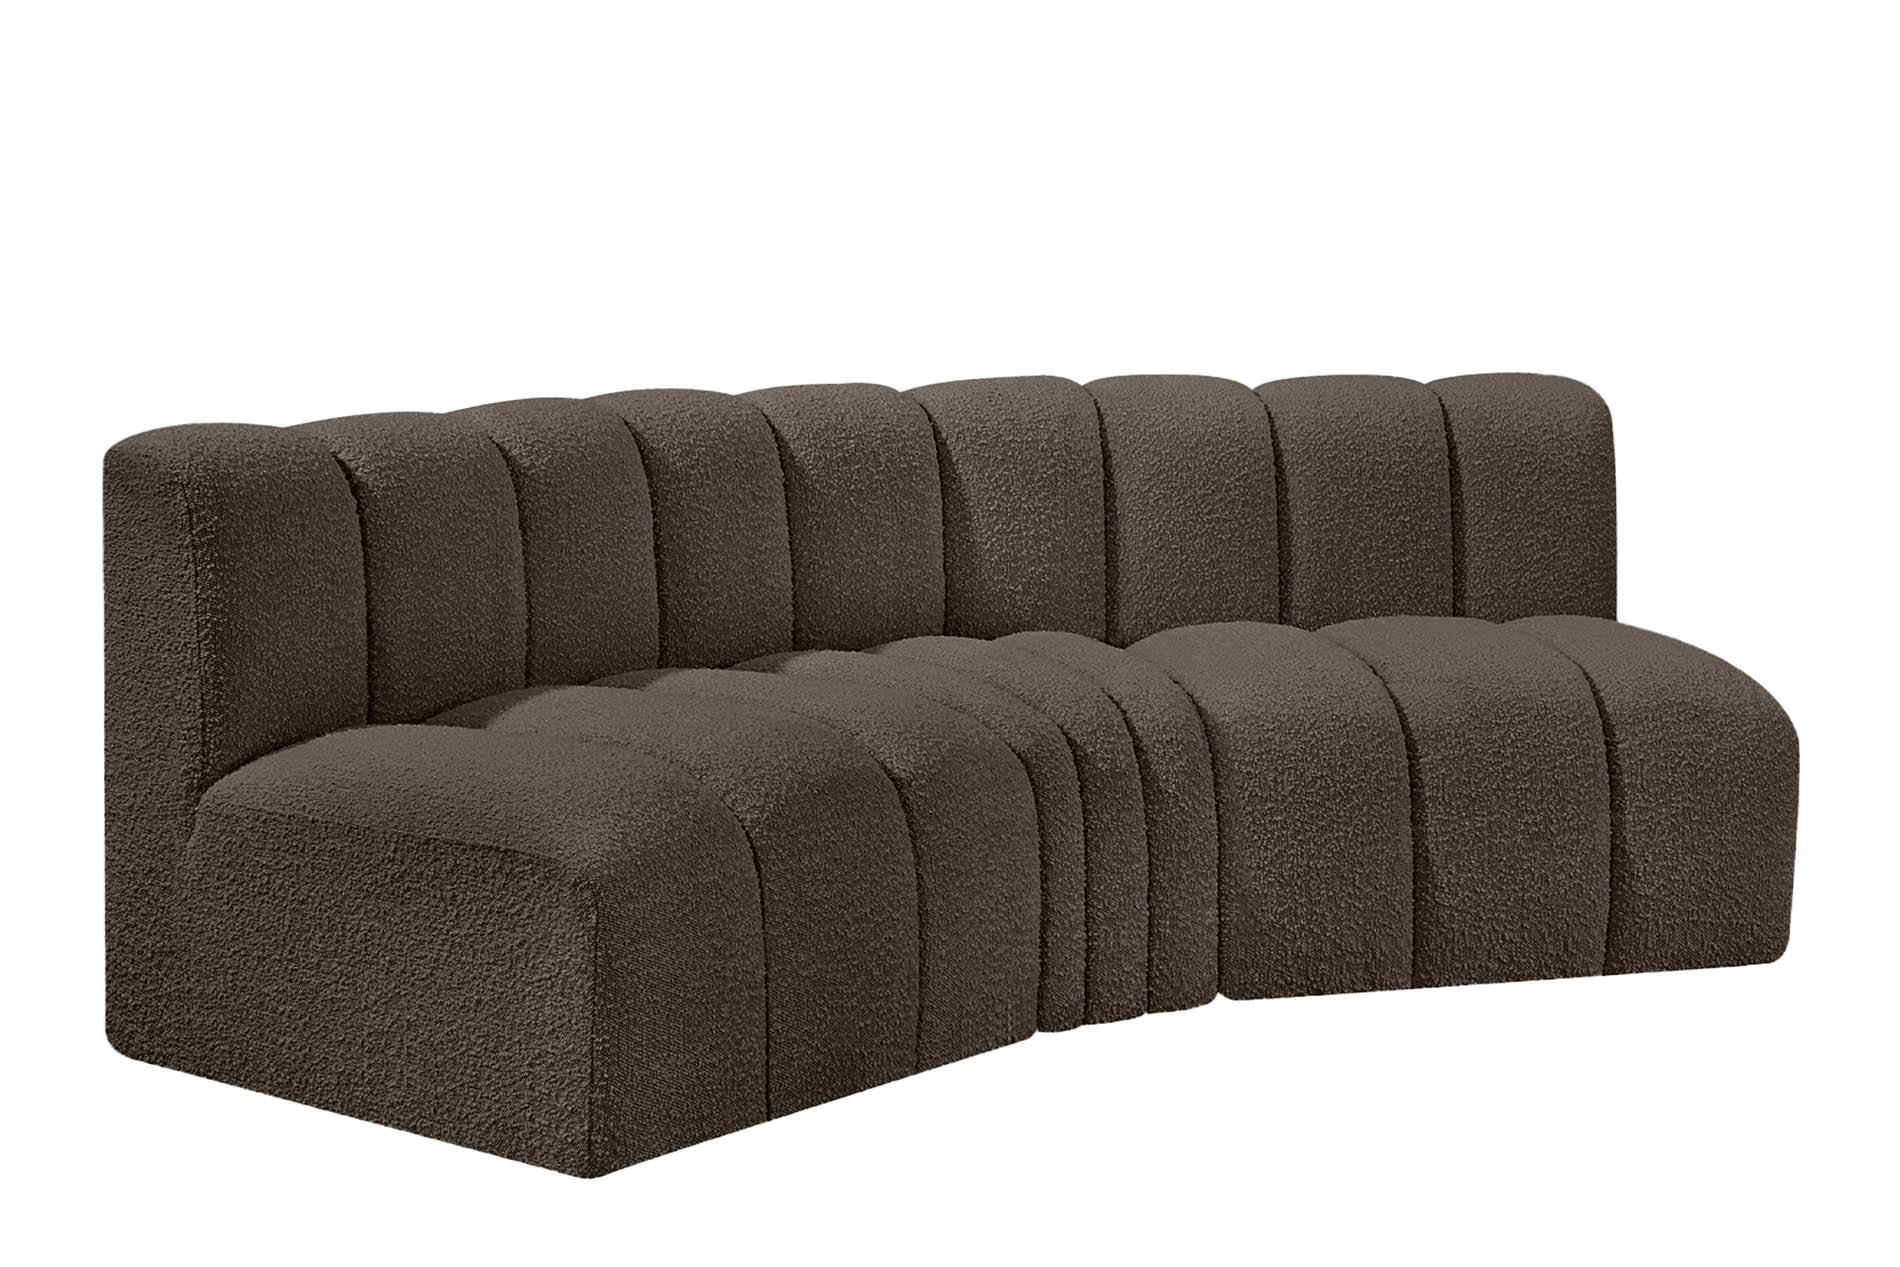 Contemporary, Modern Modular Sectional Sofa ARC 102Brown-S3B 102Brown-S3B in Brown 